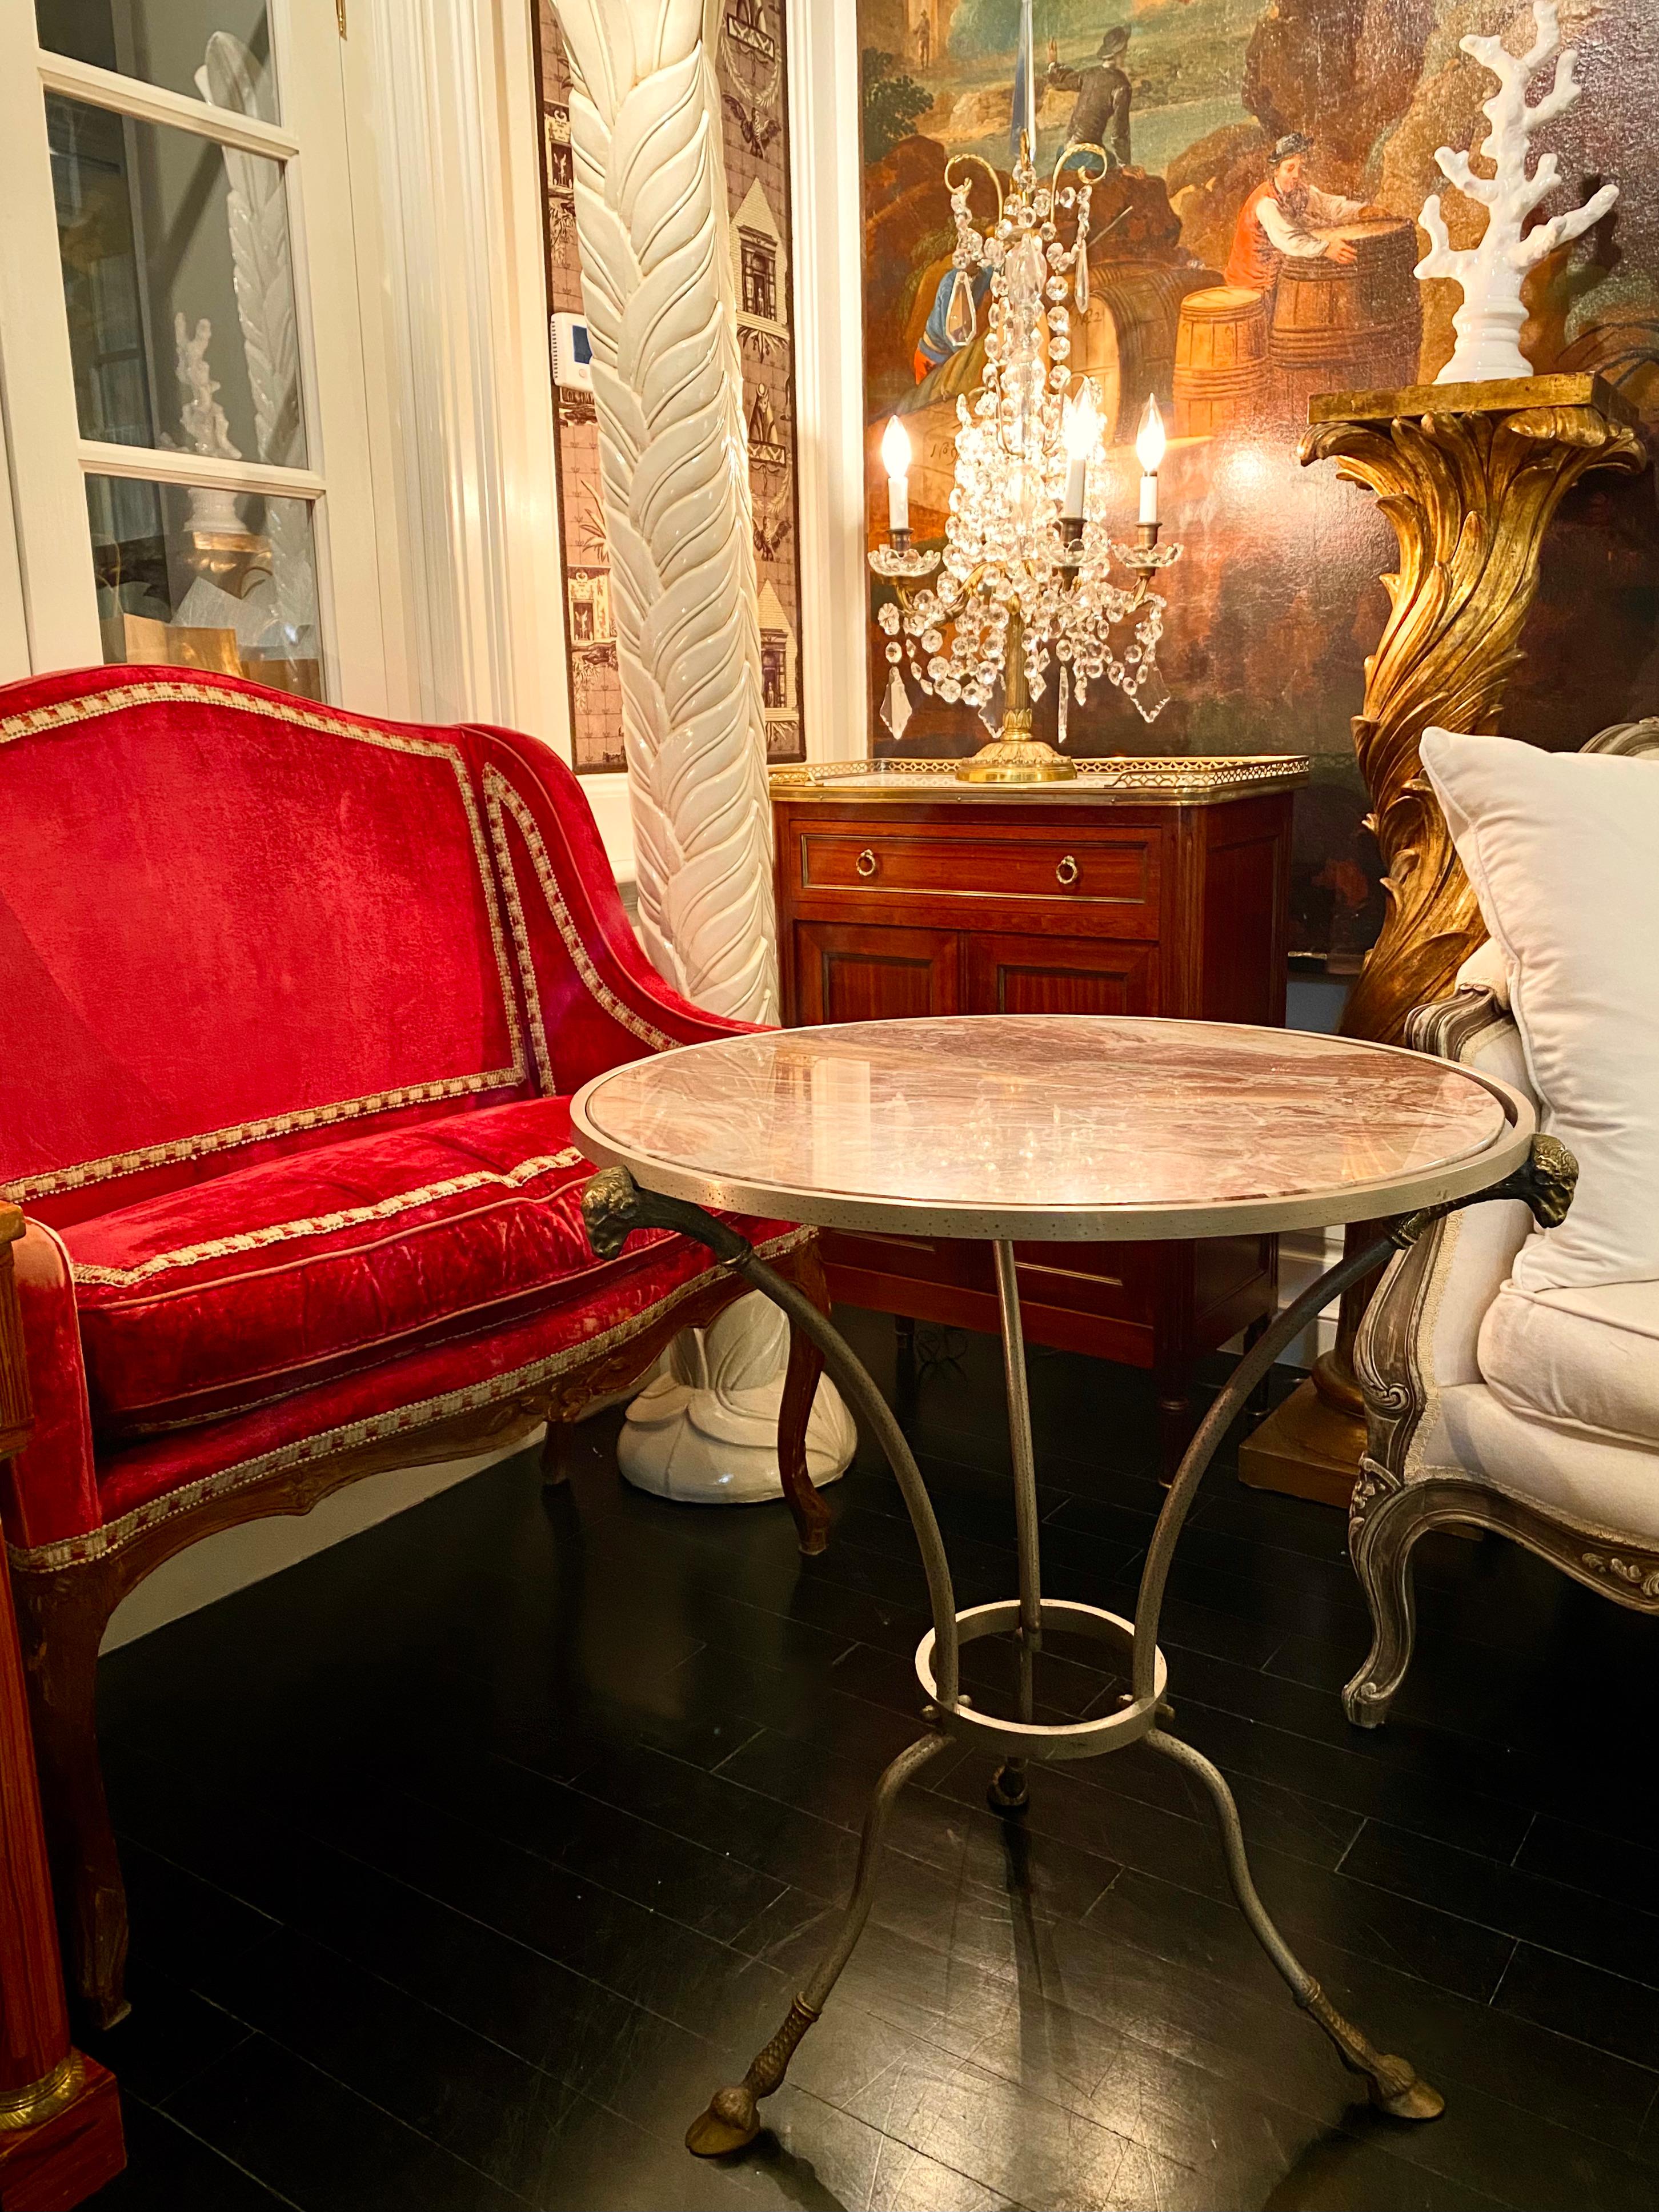 Bronze and red marble Empire style Gueridon table

A classic French bronze and red marble round gueridon table on scrolled legs with hoof (sabot) feet on casters. Topped by a rare and stunning red and cream marble as appears from the various